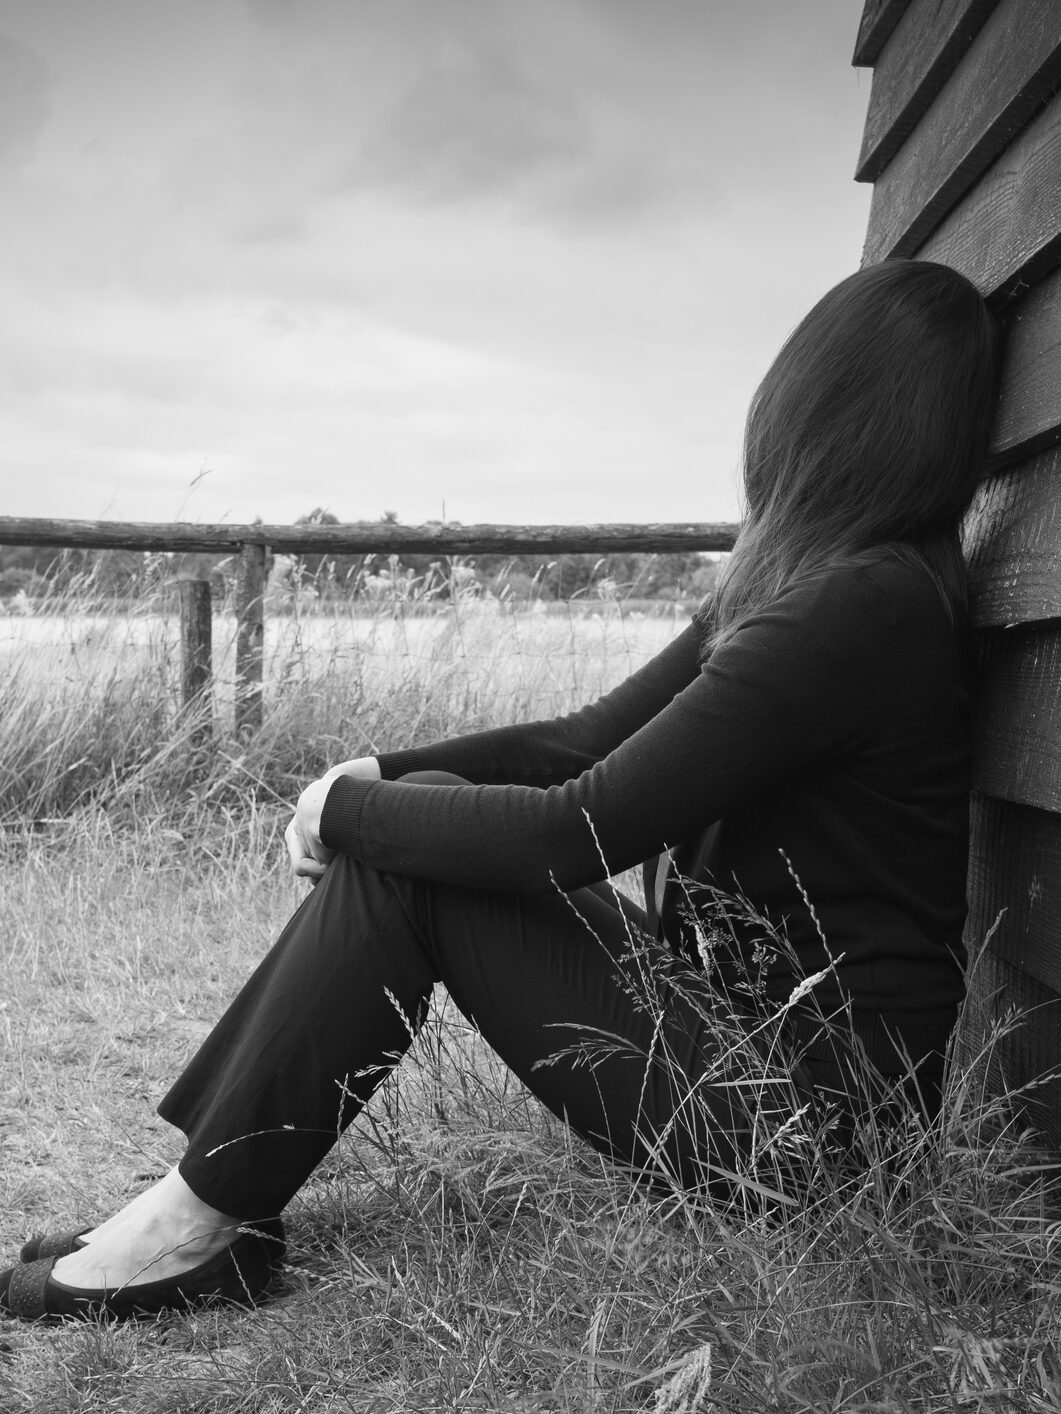 Young sad anonymous woman leaning against a hut and gazing into the distance. Monochrome portrait.